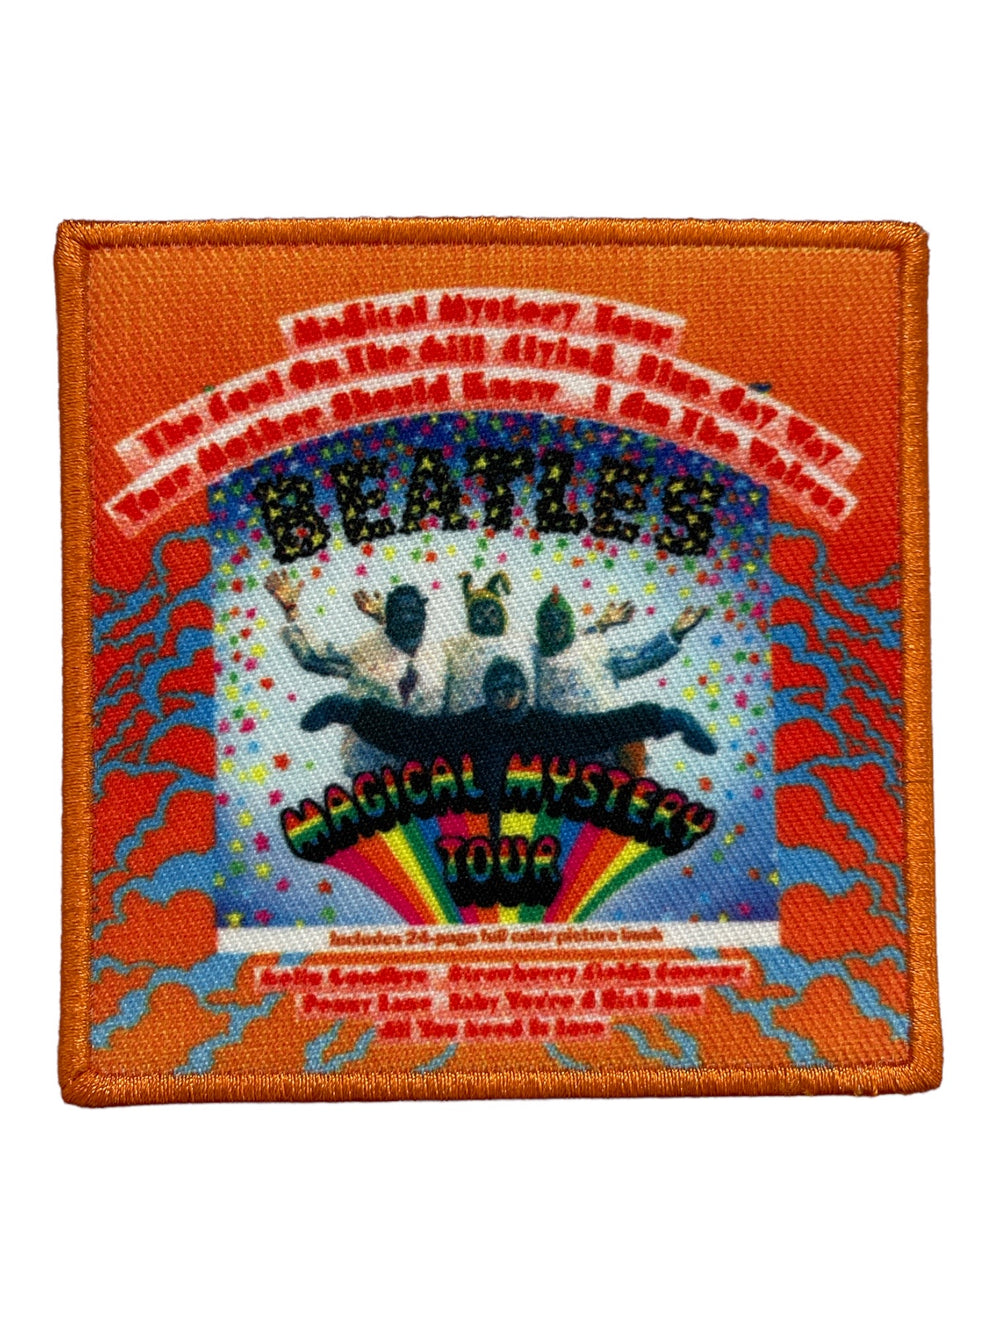 Beatles The Magical Mystery Tour Official Woven Patch Brand New